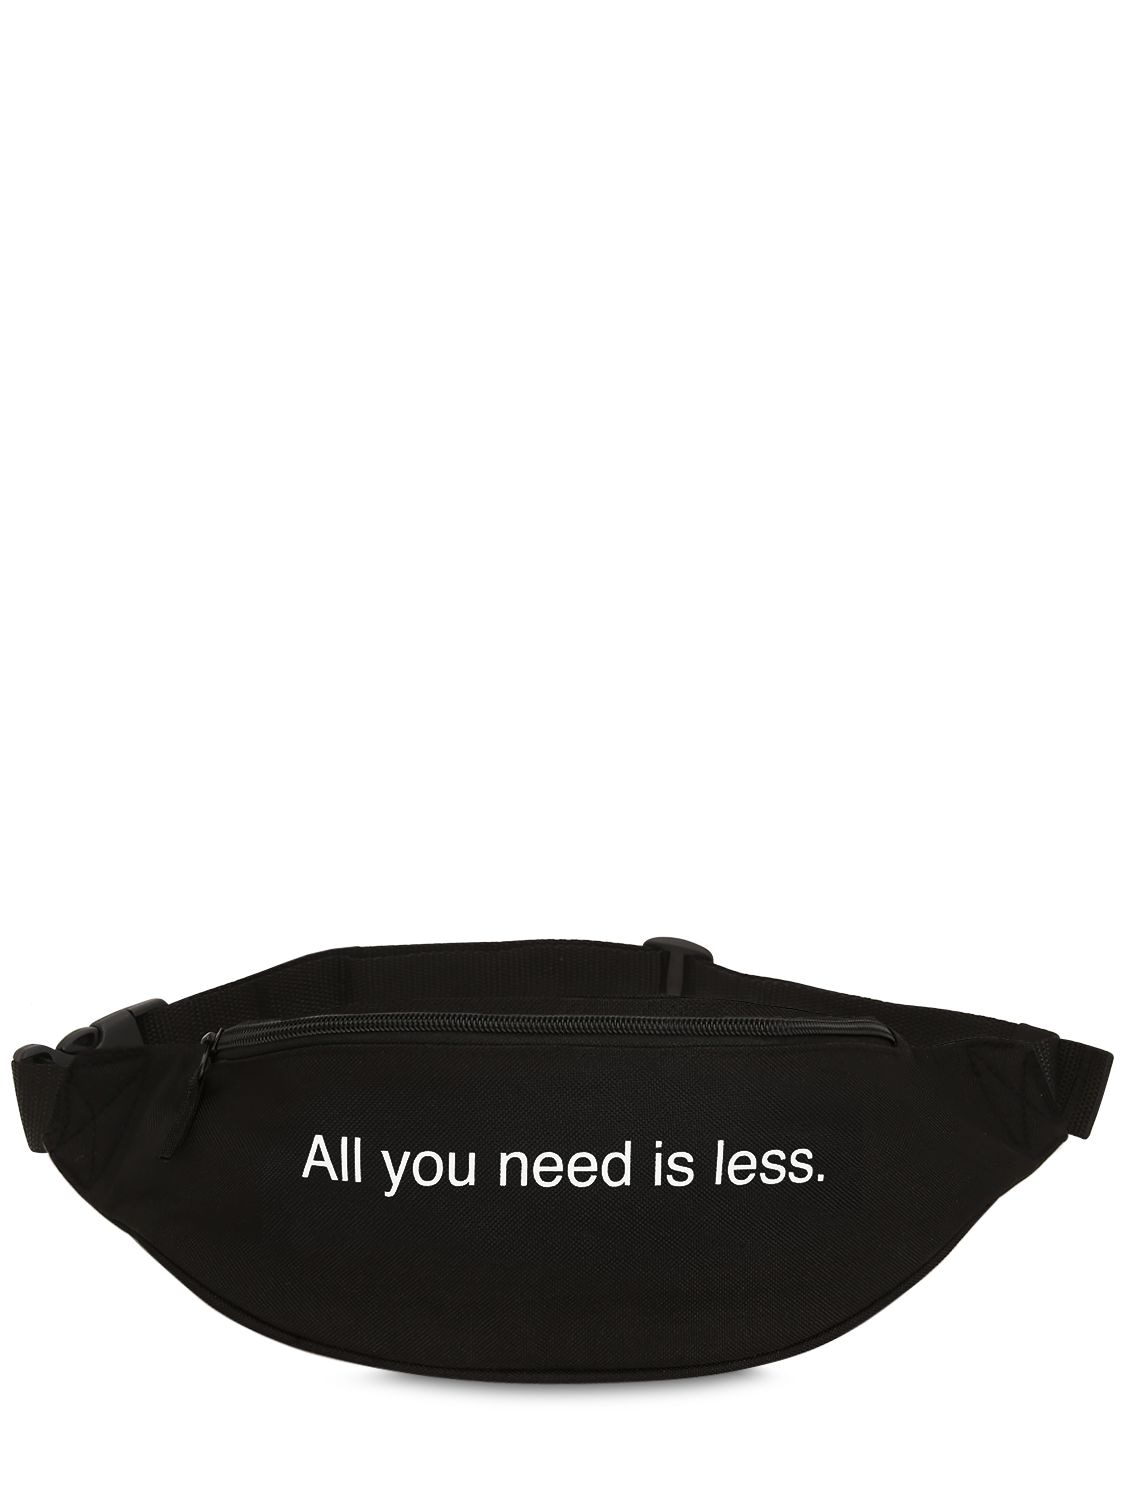 Famt - Fuck Art Make Tees All You Need Is Less Belt Bag In Black